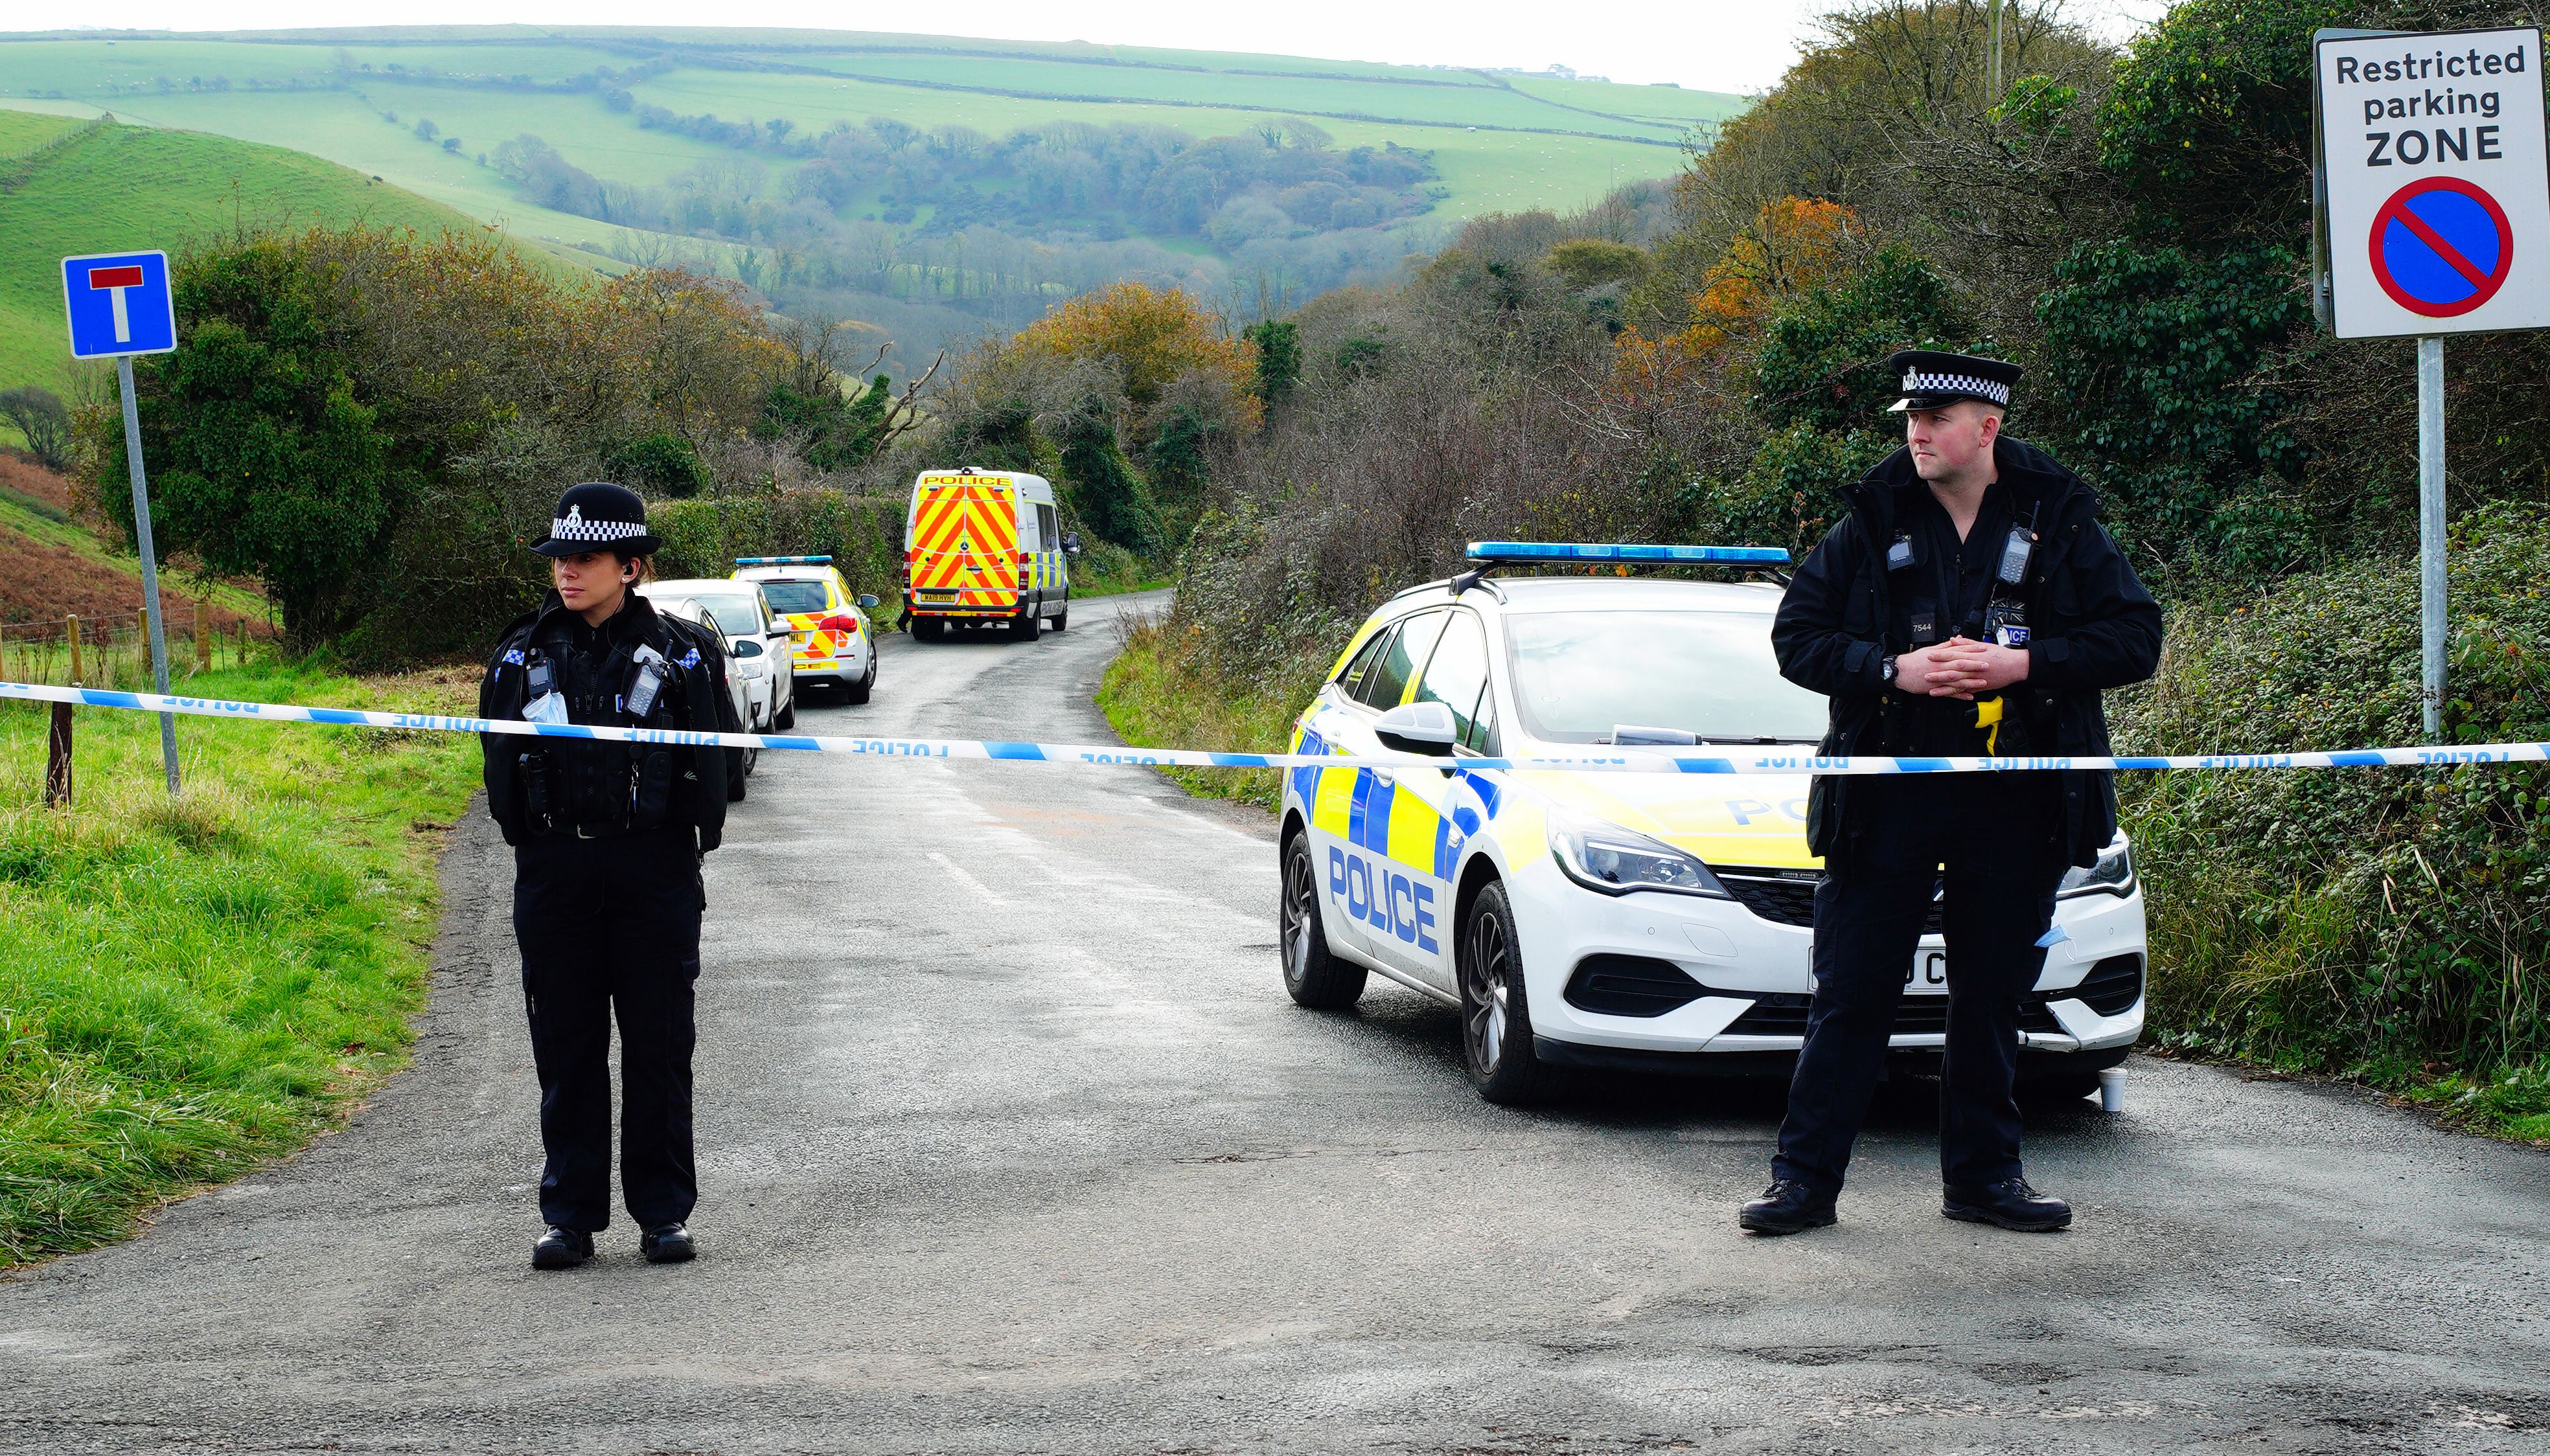 Police cordon off the road leading to the Bovisand cafe and car park in Plymouth, after the body of a woman was found in the hunt for missing Plymouth teenager Bobbi-Anne McLeod, who has not been seen since Saturday evening.